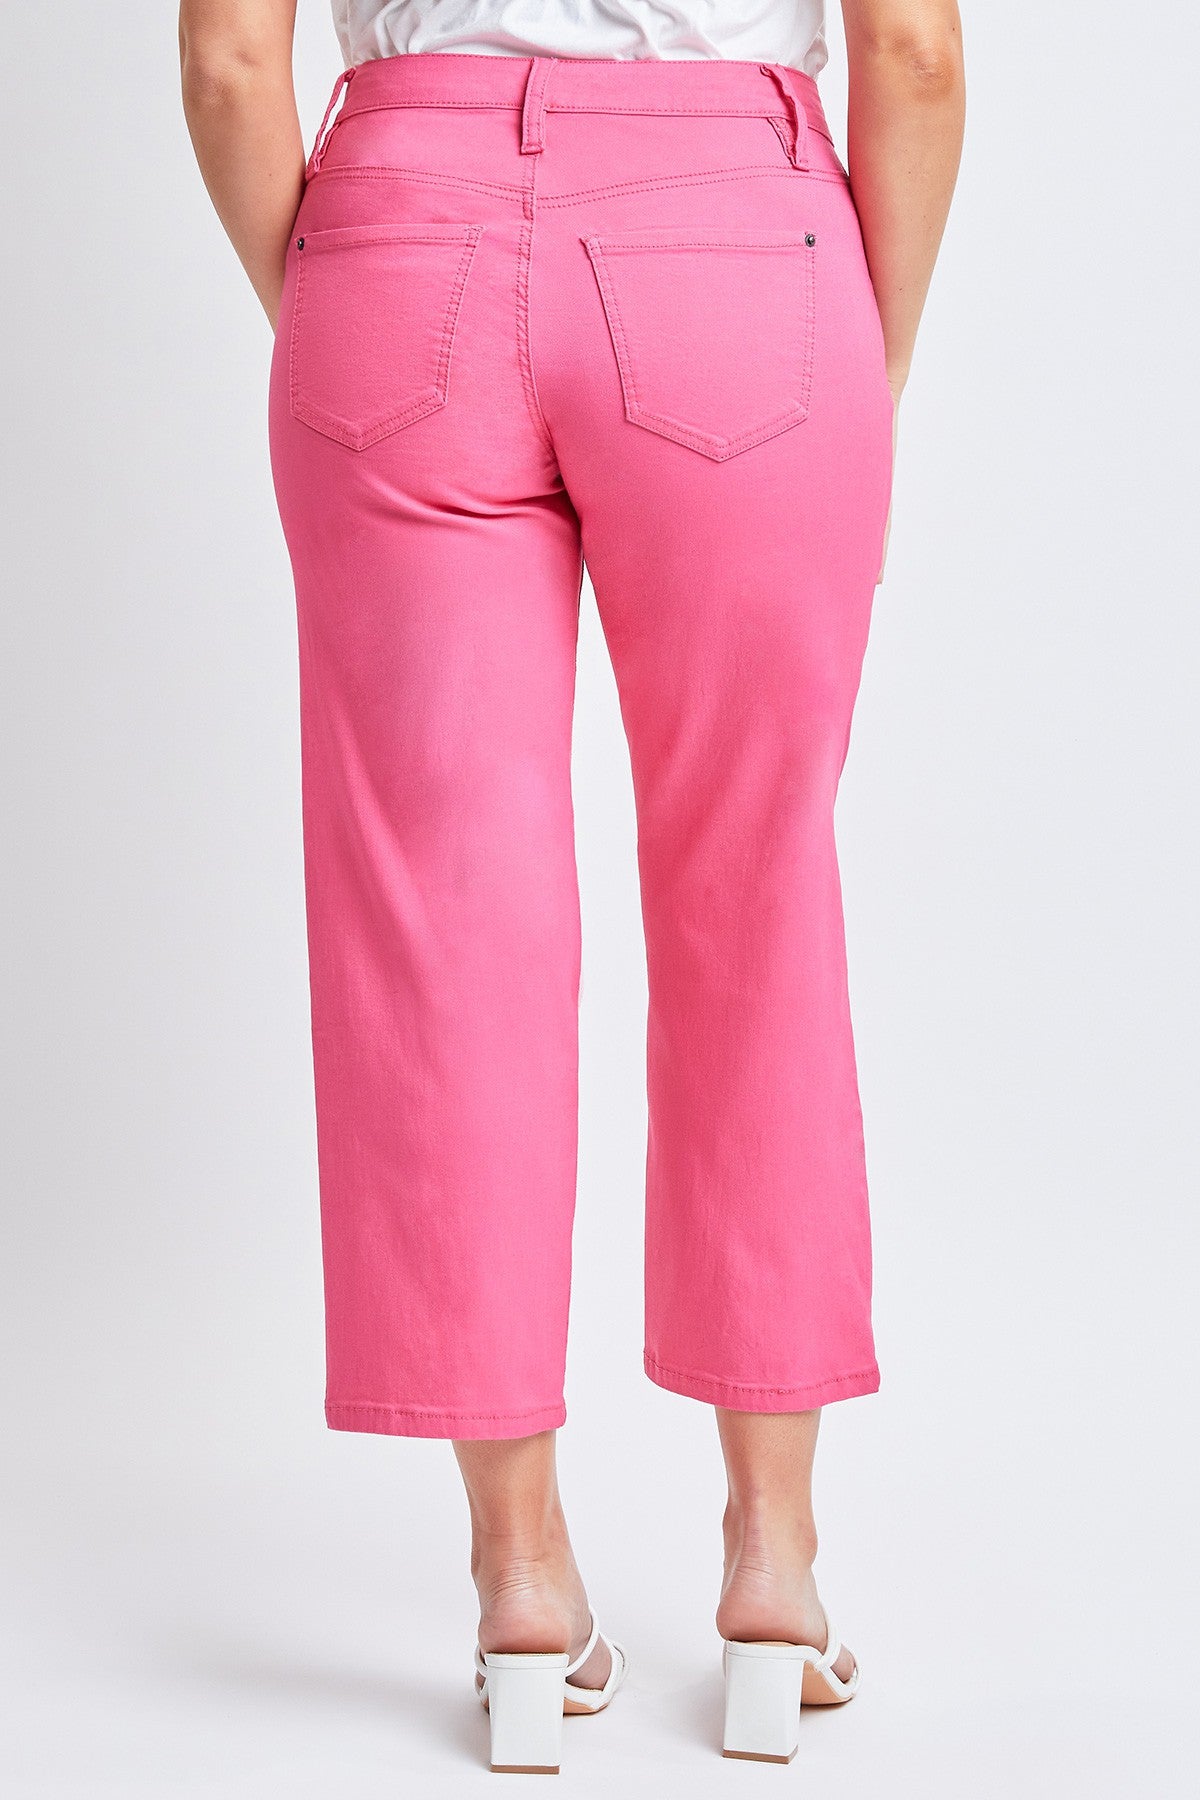 Crop Mid-Rise Denim In Fiery Coral Pink